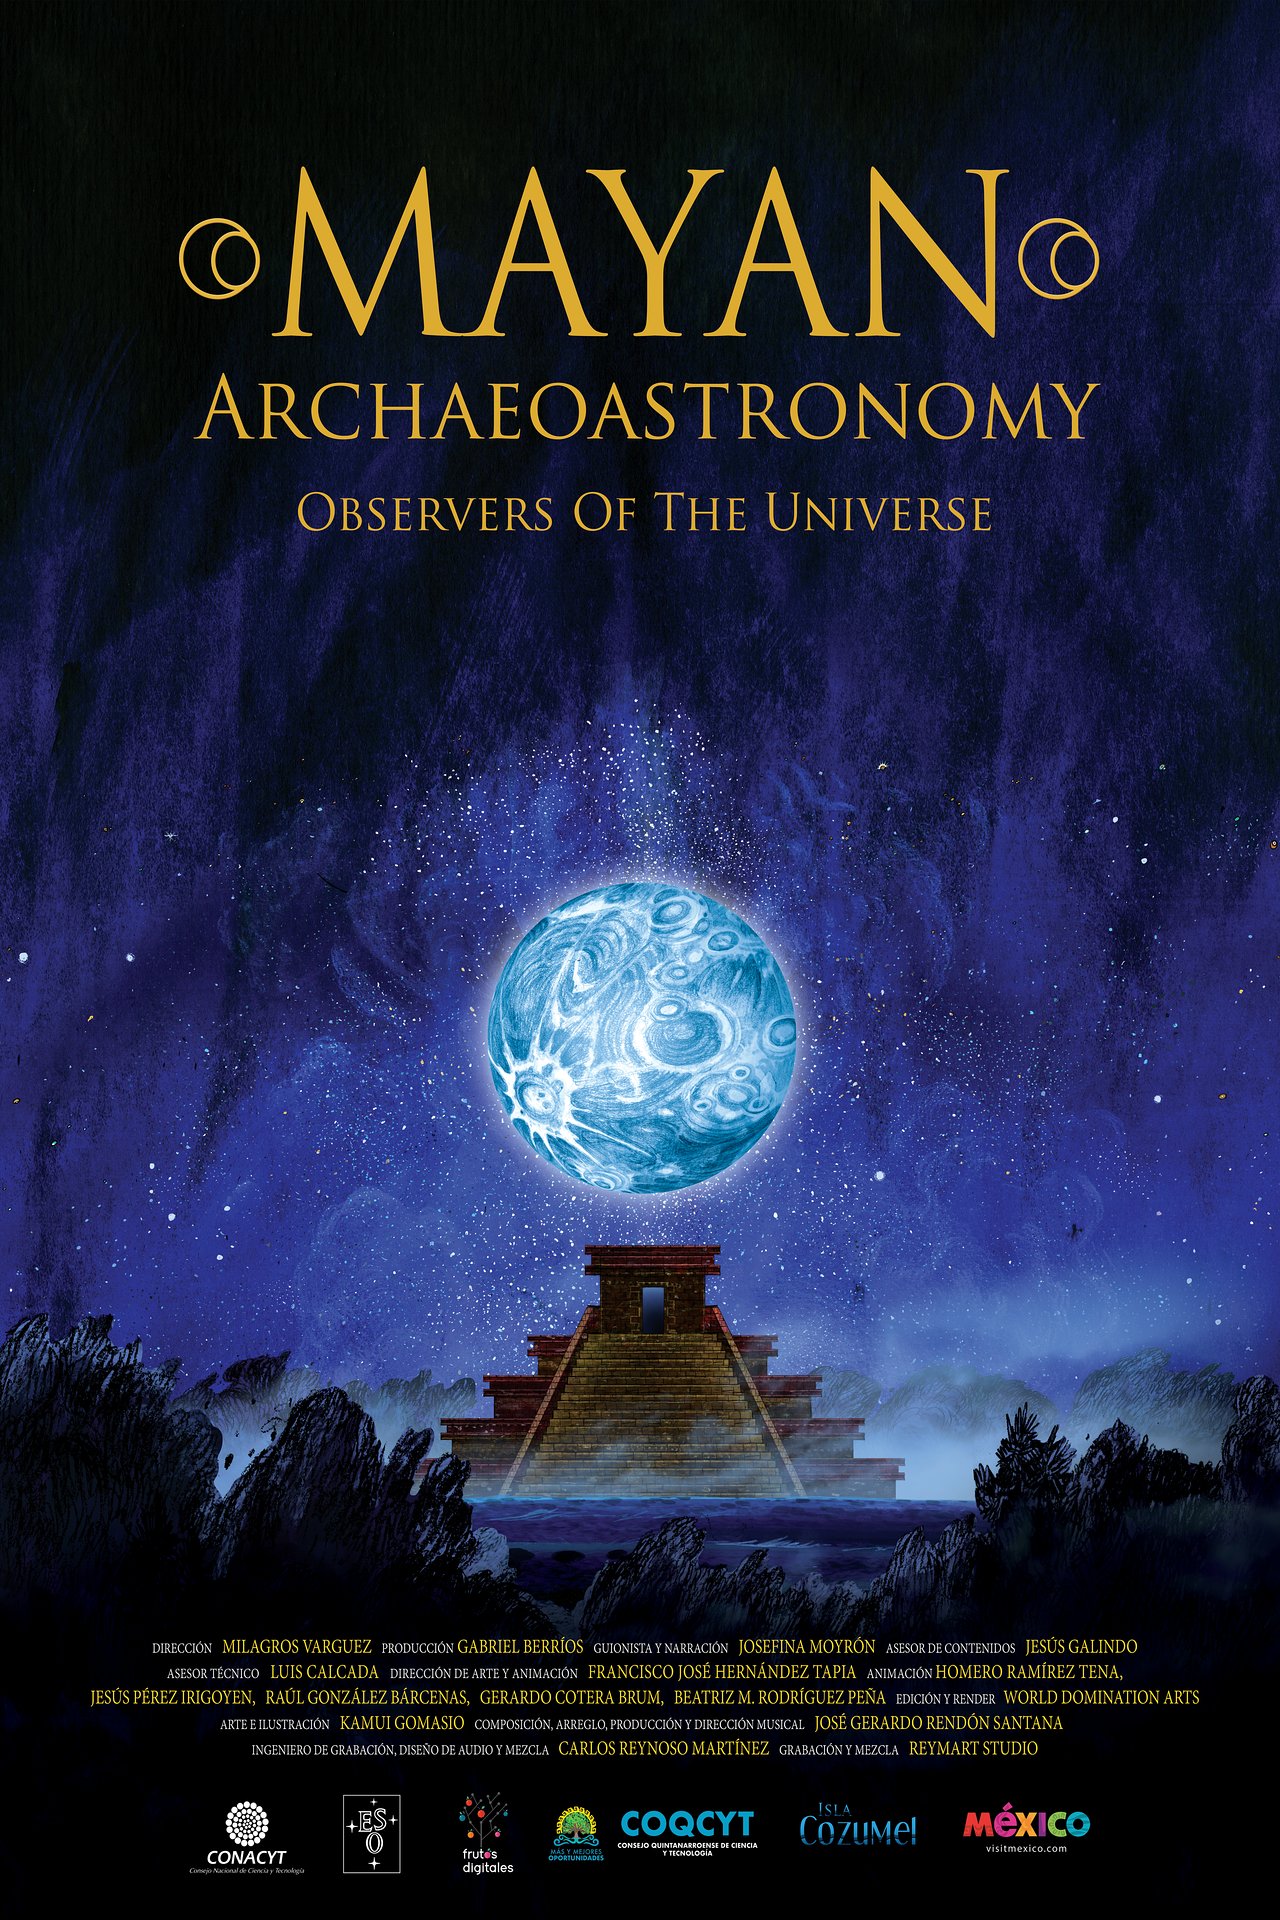 Mayan Archaeoastronomy: Observers of the Universe